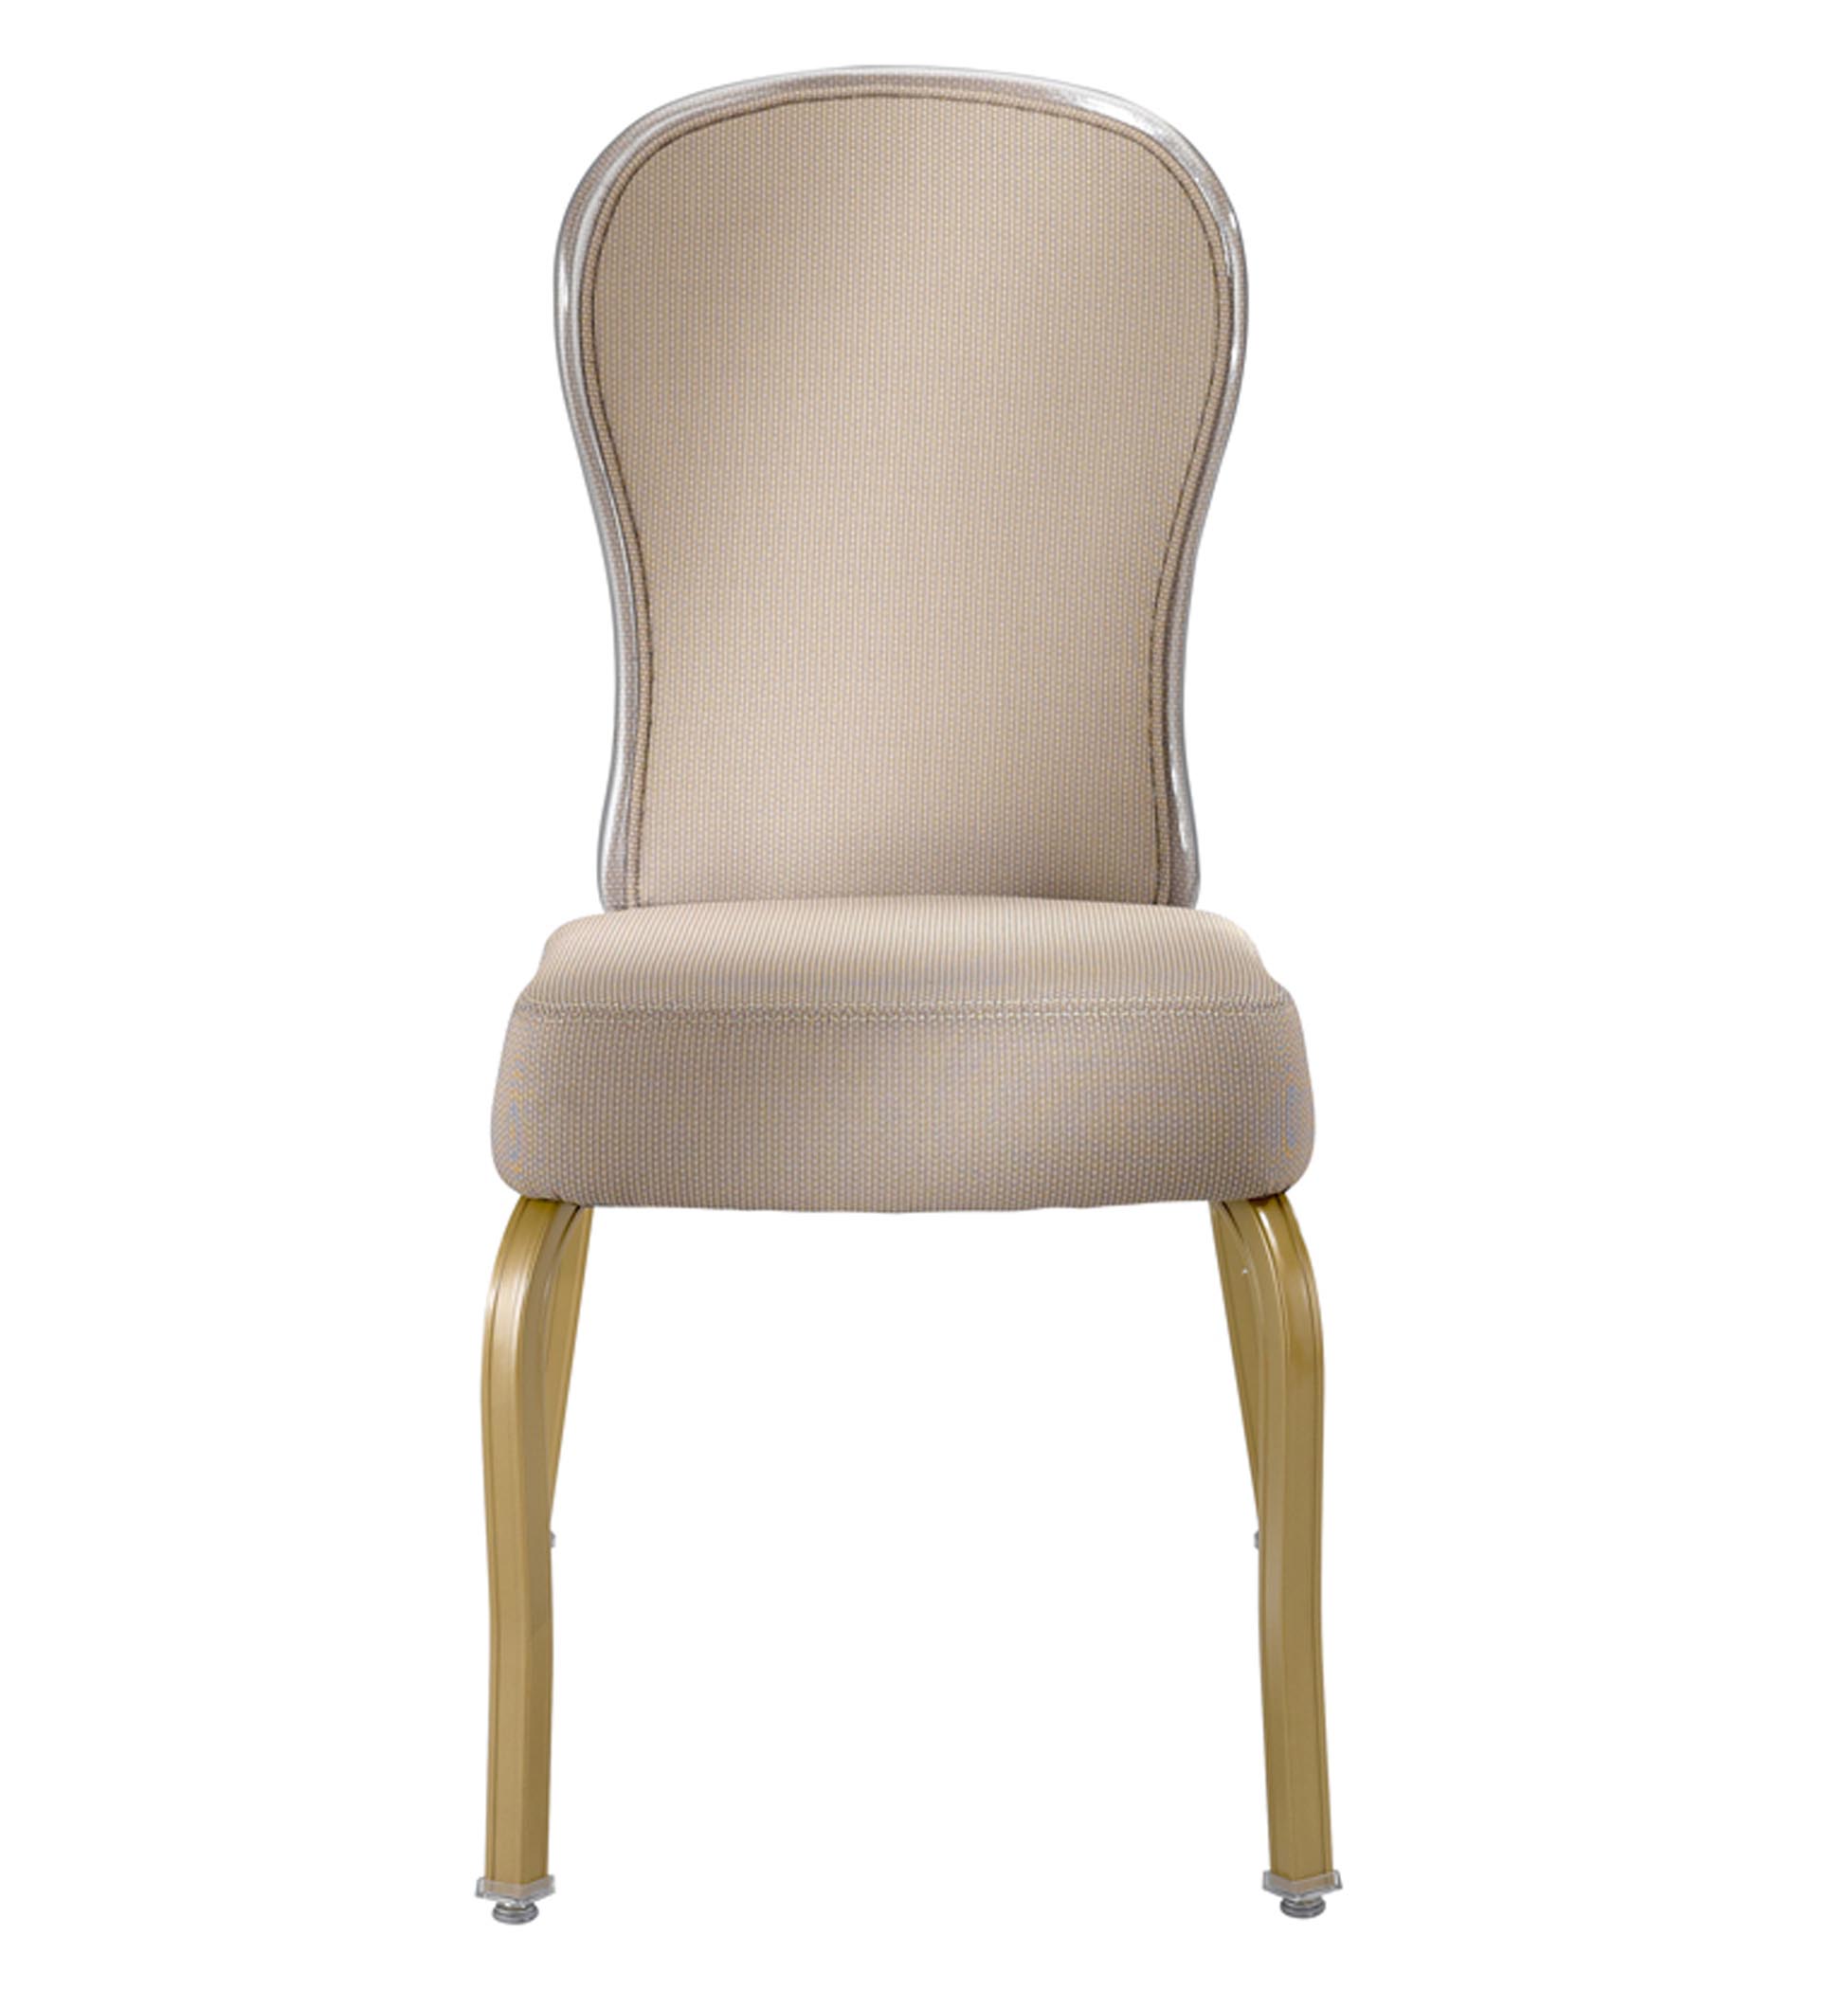 8551 / 8551-AB Aluminum Stacking Banquet Chair